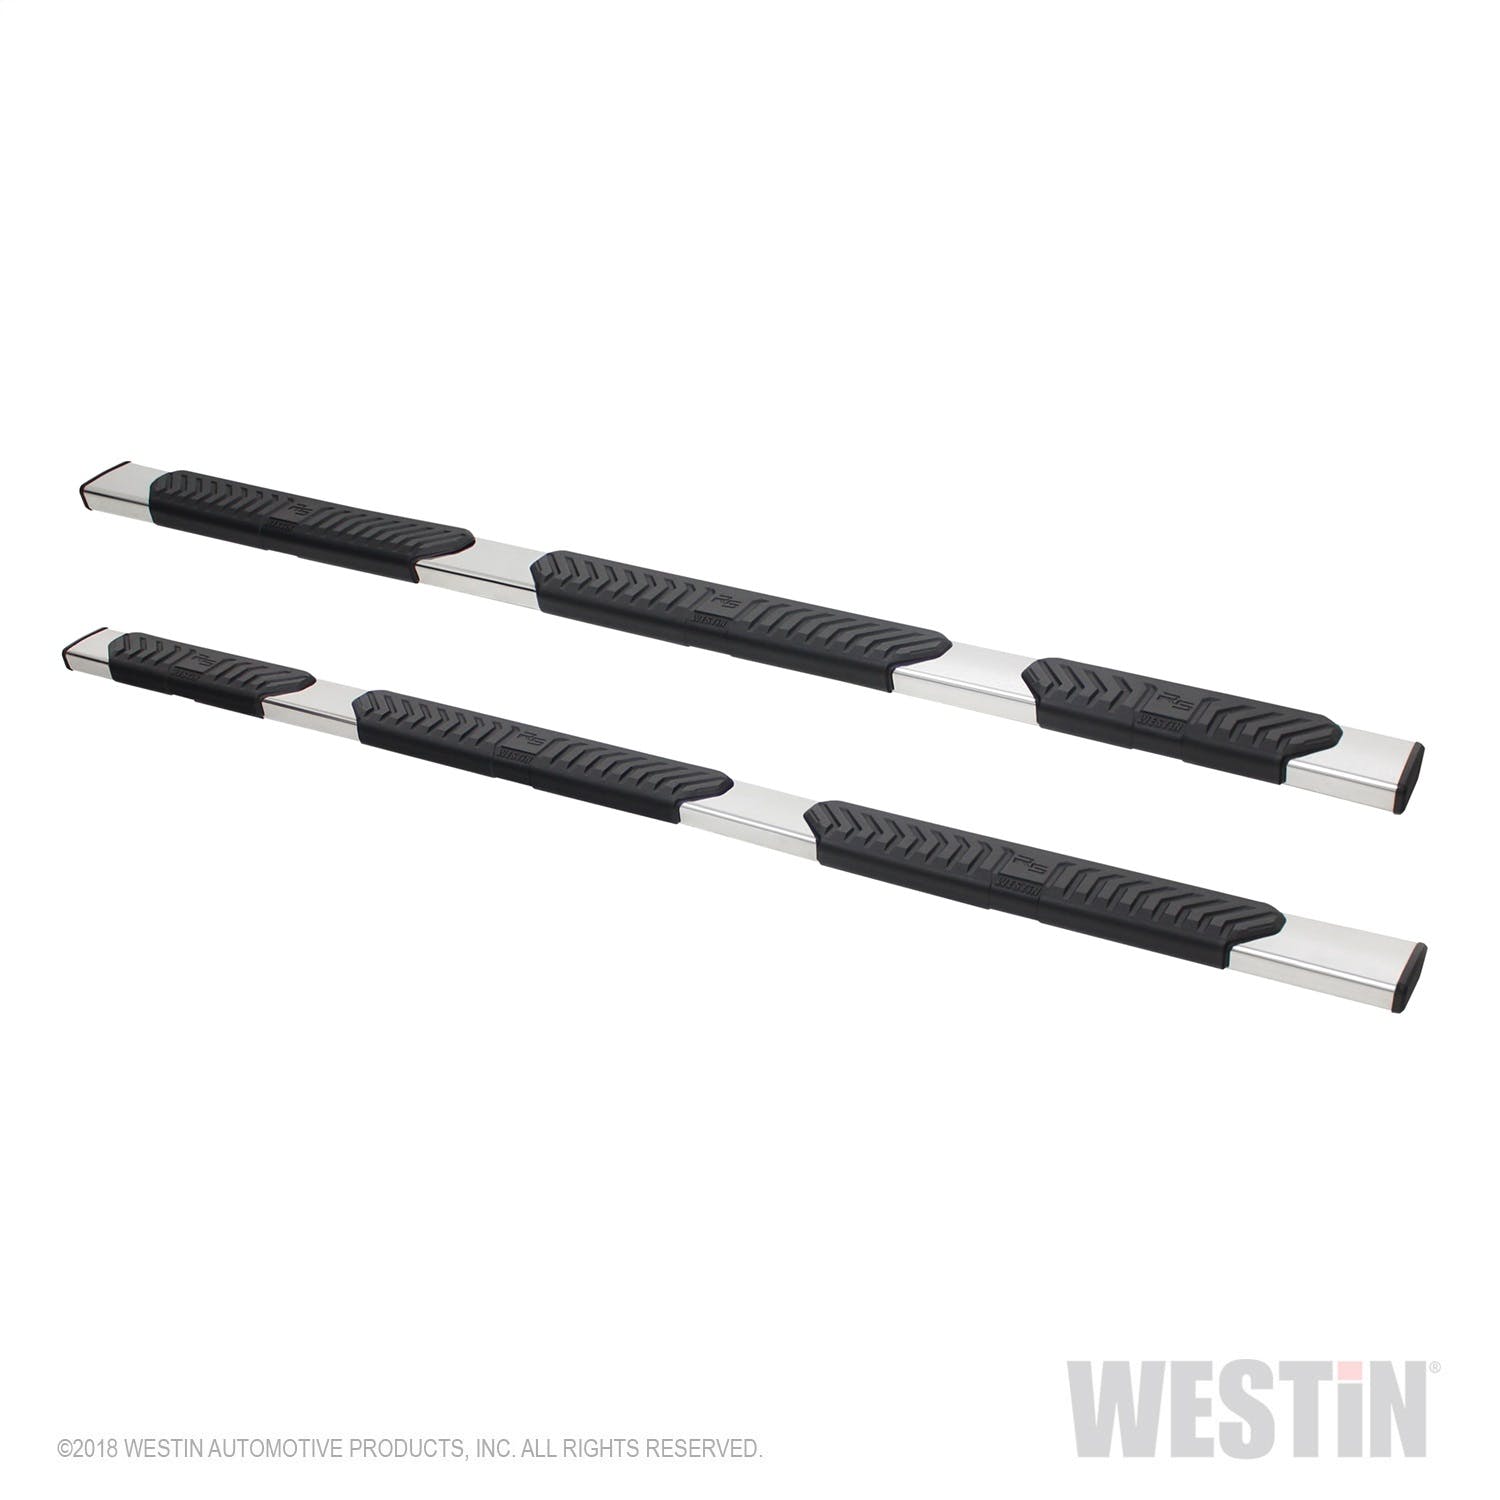 Westin Automotive 28-534700 R5 M-Series Wheel-to-Wheel Nerf Step Bars Polished Stainless